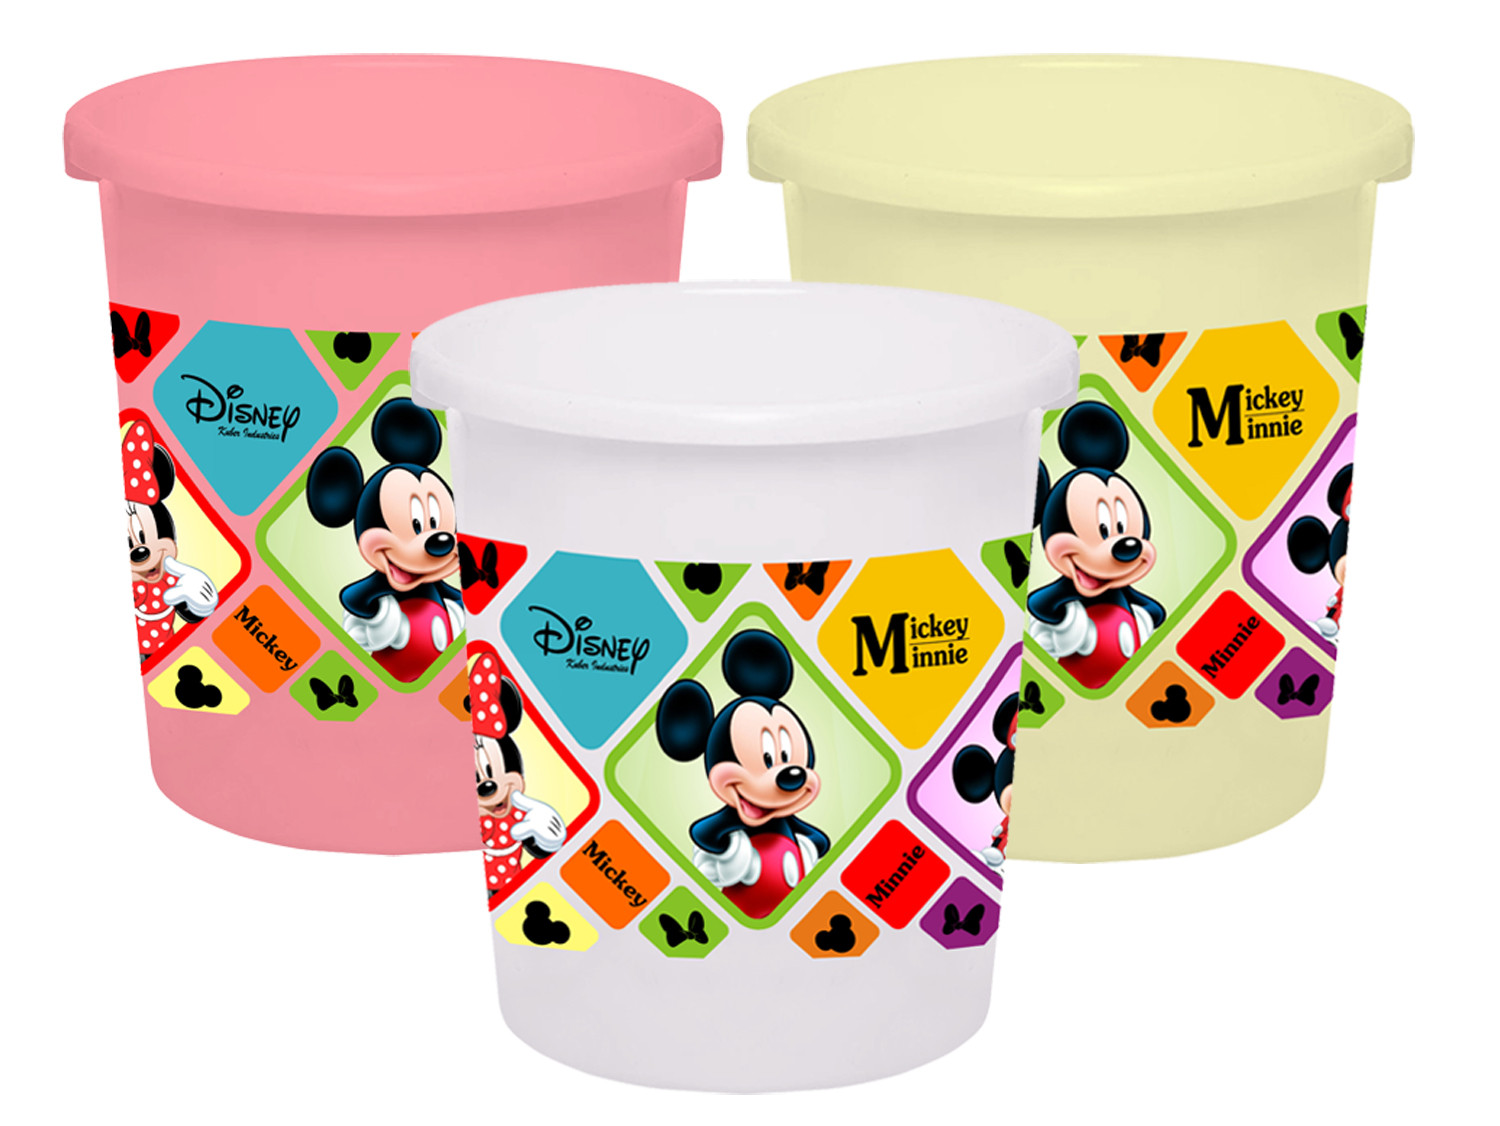 Kuber Industries Disney Mickey Minnie Print Plastic 3 Pieces Garbage Waste Dustbin/Recycling Bin for Home, Office, Factory, 5 Liters (Pink & Cream & White) -HS_35_KUBMART17809